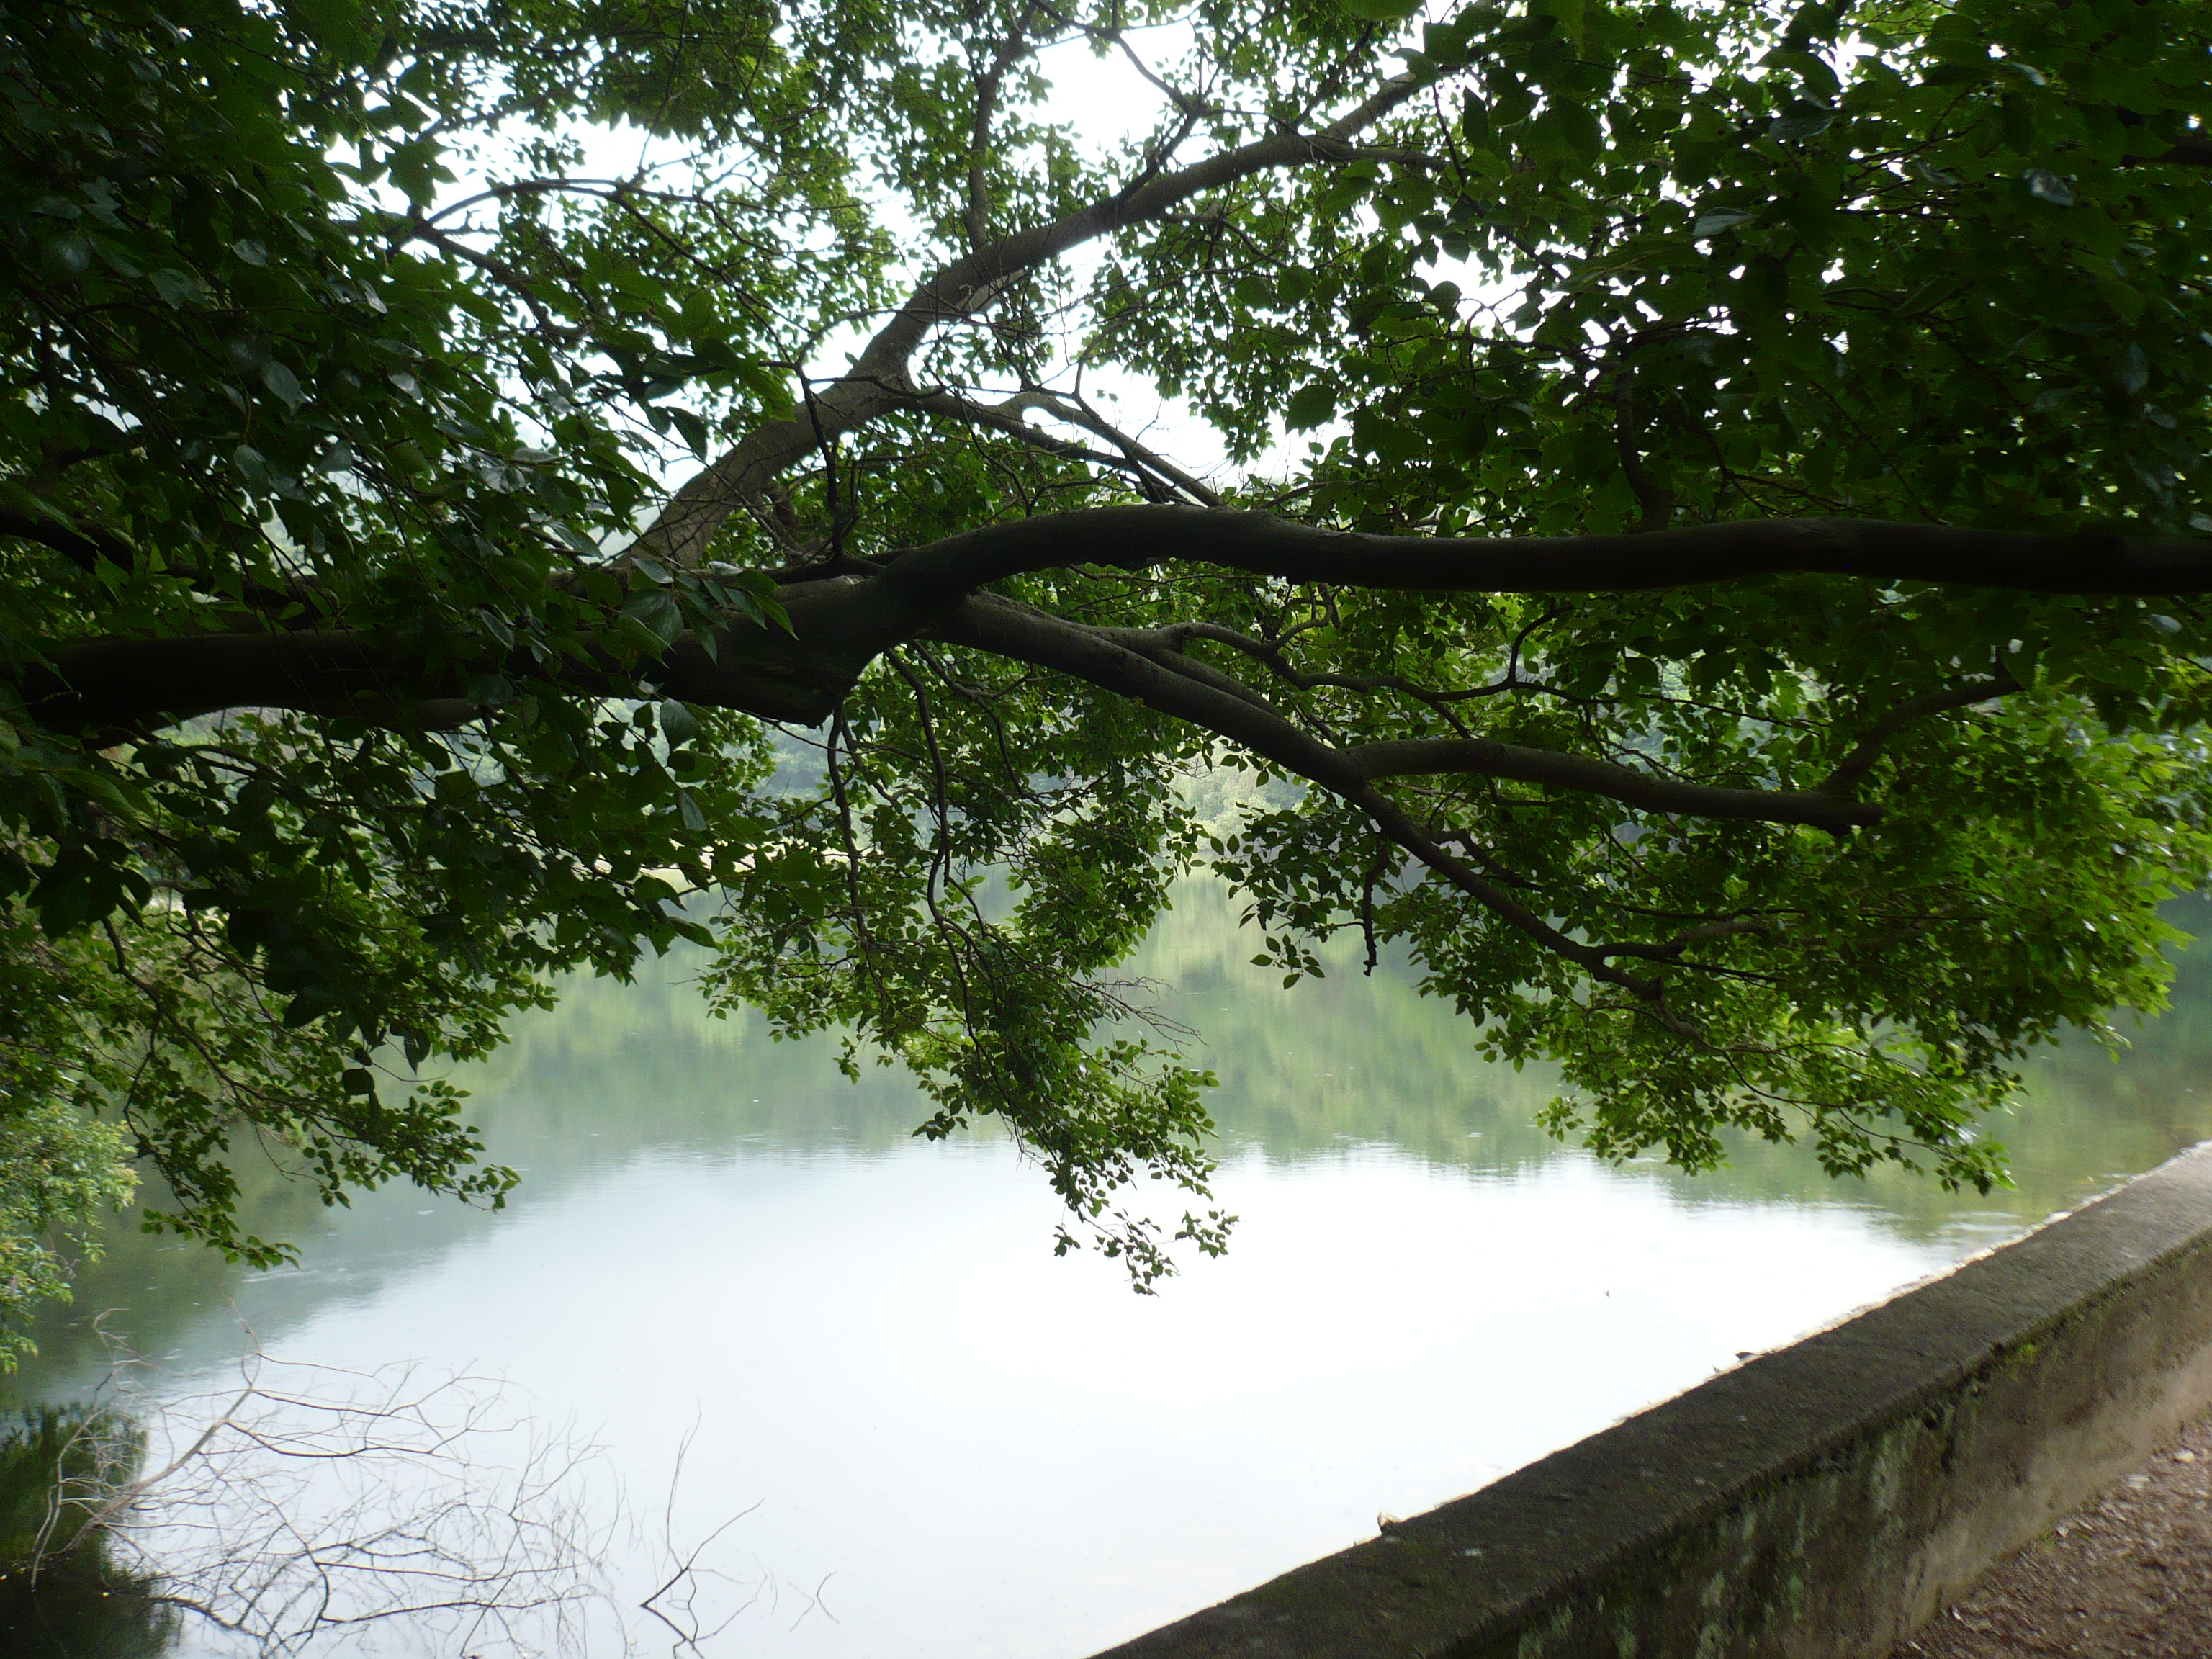 An old, thick tree branch with lots of greenery, overhanging still green water, the top edge of a concrete wall in the foreground